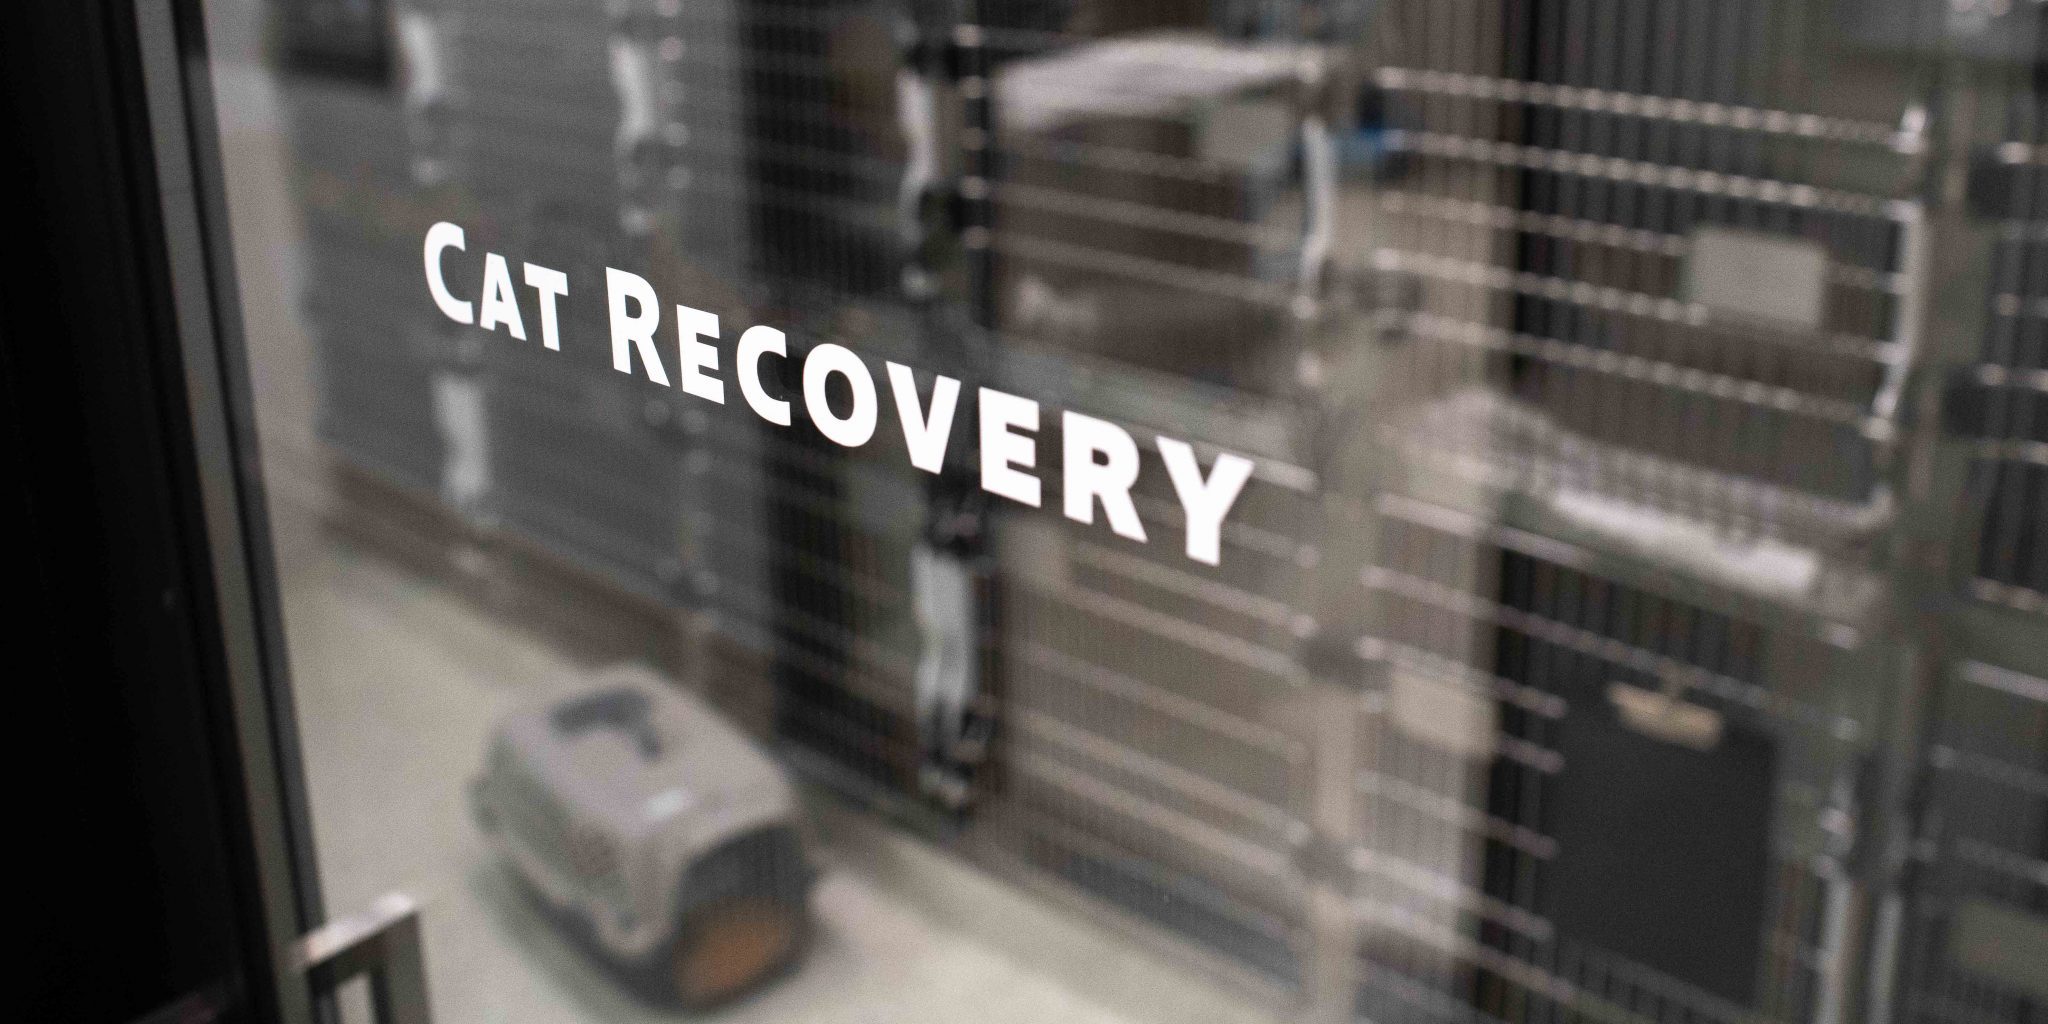 Door with a window that has white text printed on it reading "Cat Recovery"